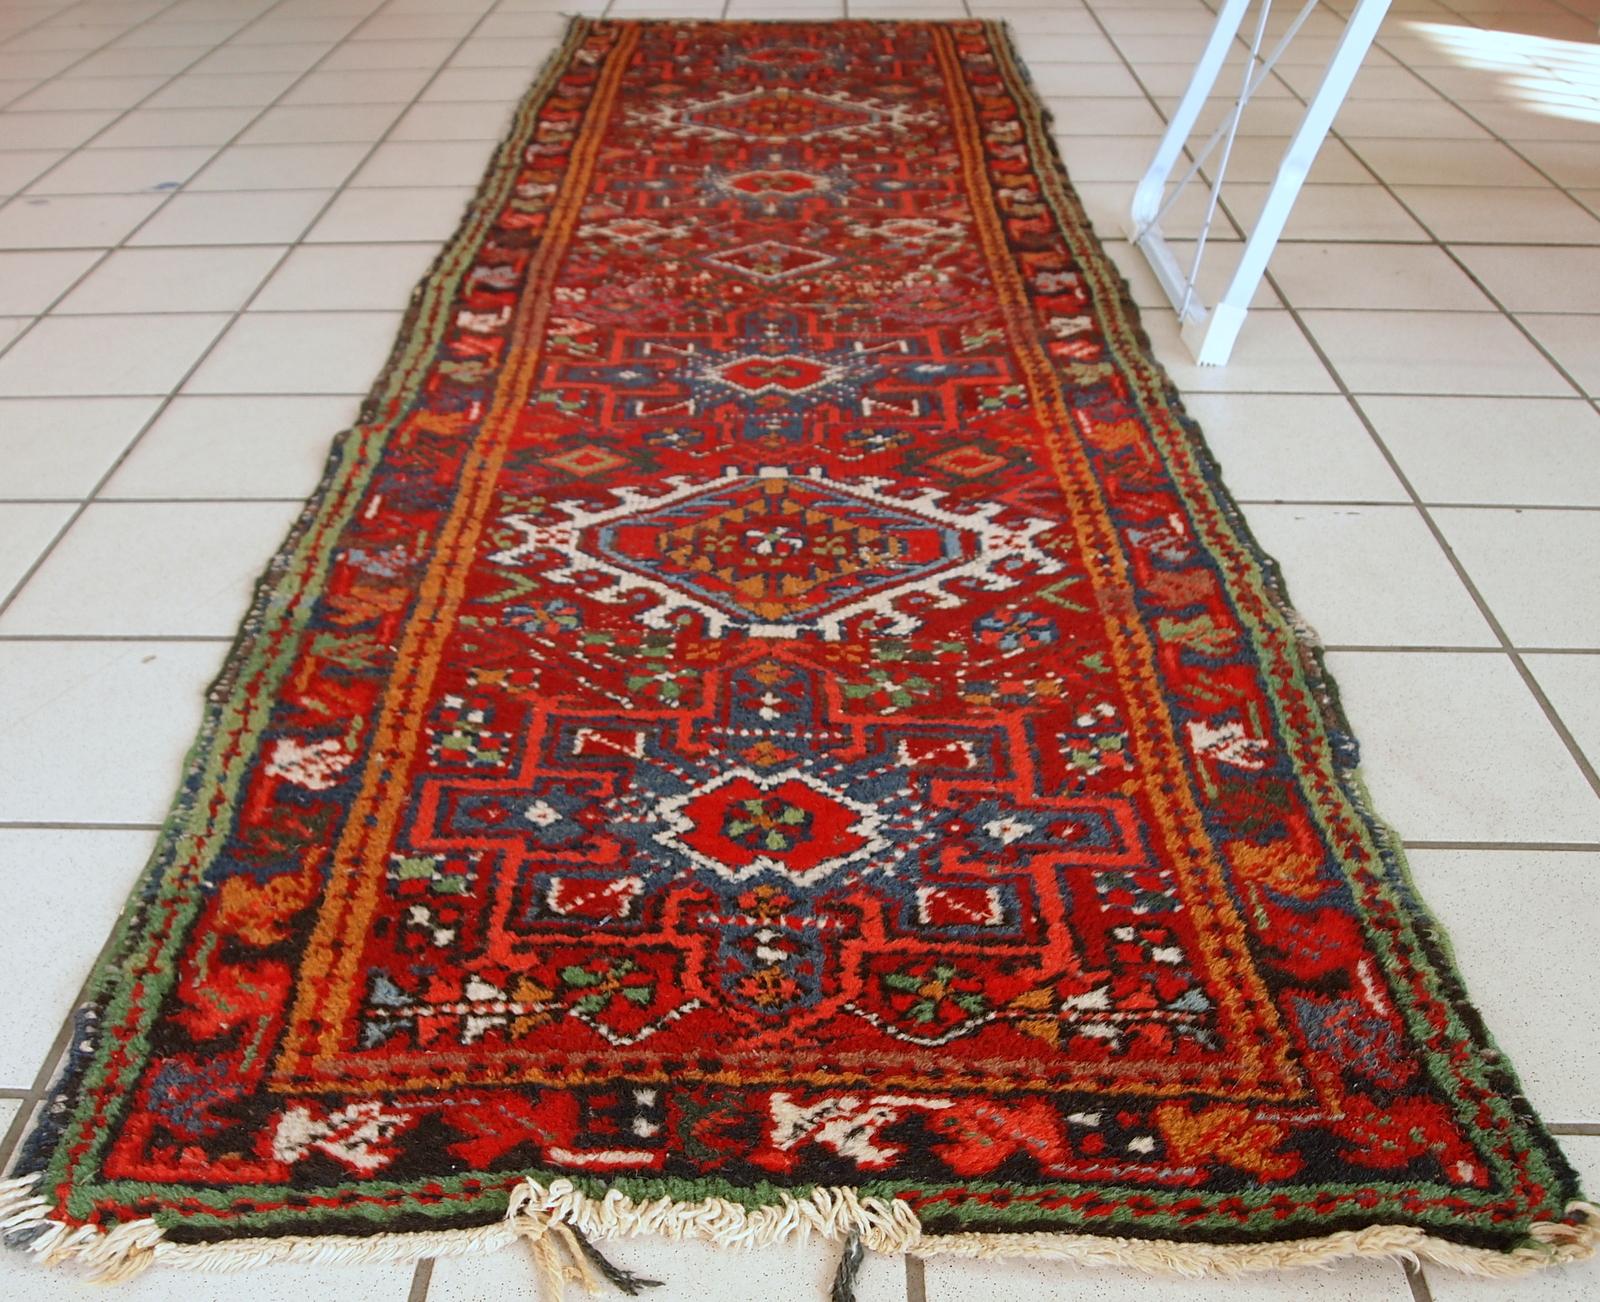 Handmade antique Karajeh style runner in distressed condition. It has been made in the beginning of 20th century in red wool.

- Condition: Distressed,

- circa 1920s,

- Size: 2.2' x 7.7' (67cm x 236cm),

- Material: Wool,

- Country of